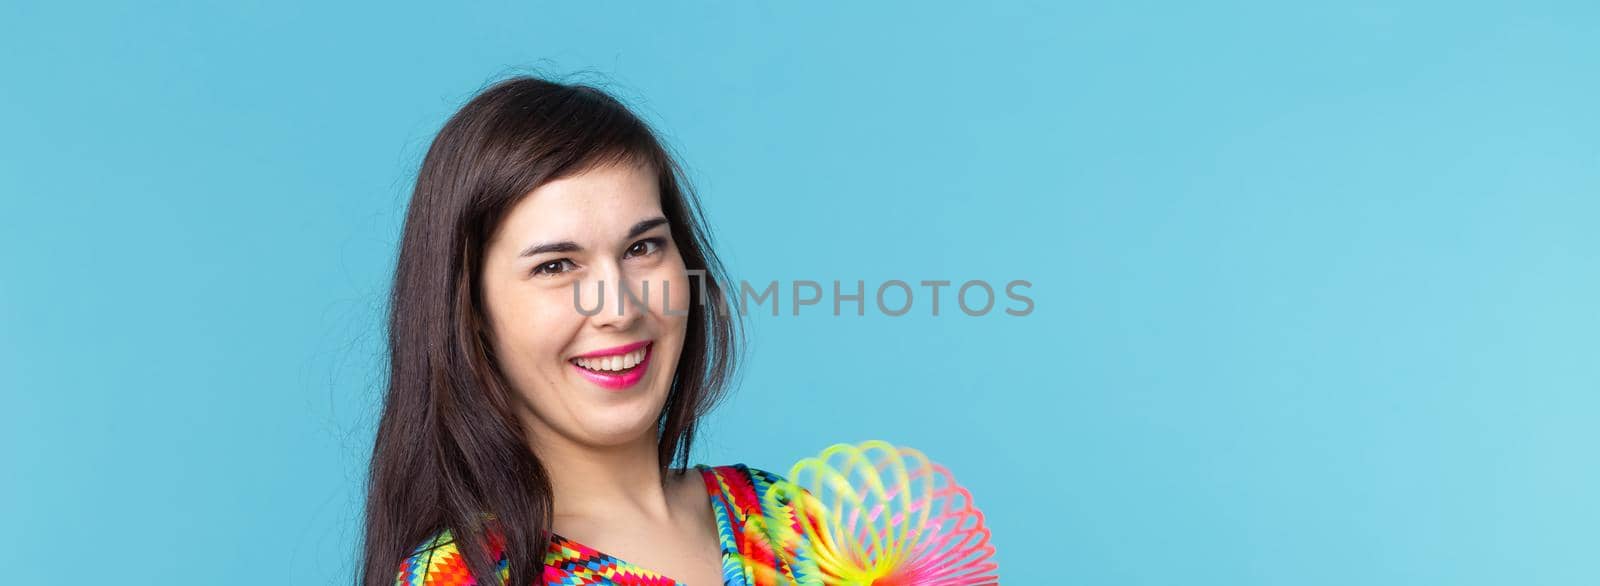 UFA, RUSSIA - MAY 26, 2017 : young woman playing with a slinky on blue background.